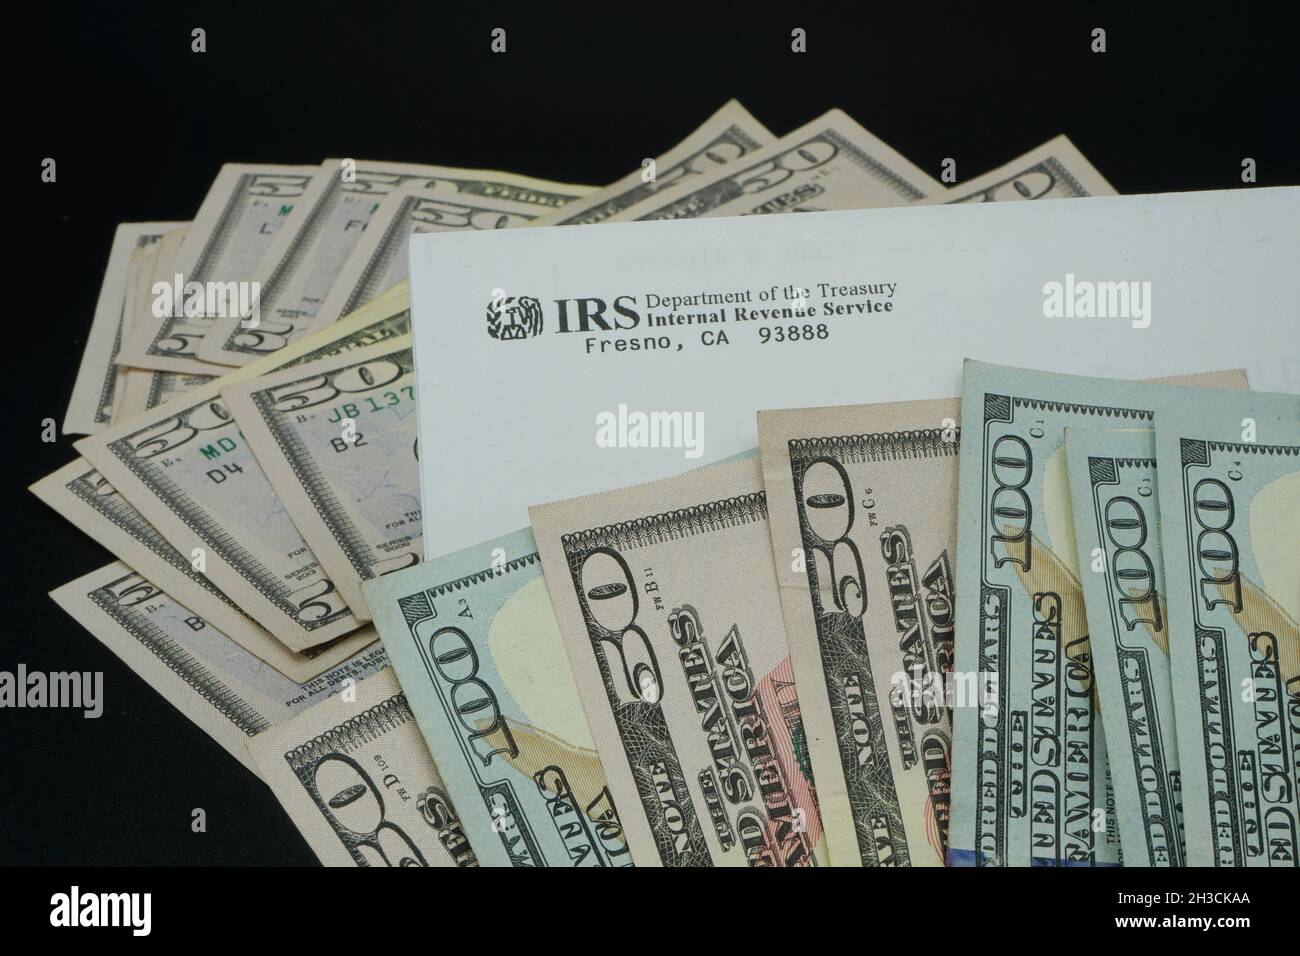 Lale Elsinore, CA - October 26, 2021: IRS Letter with US Currency Stock Photo